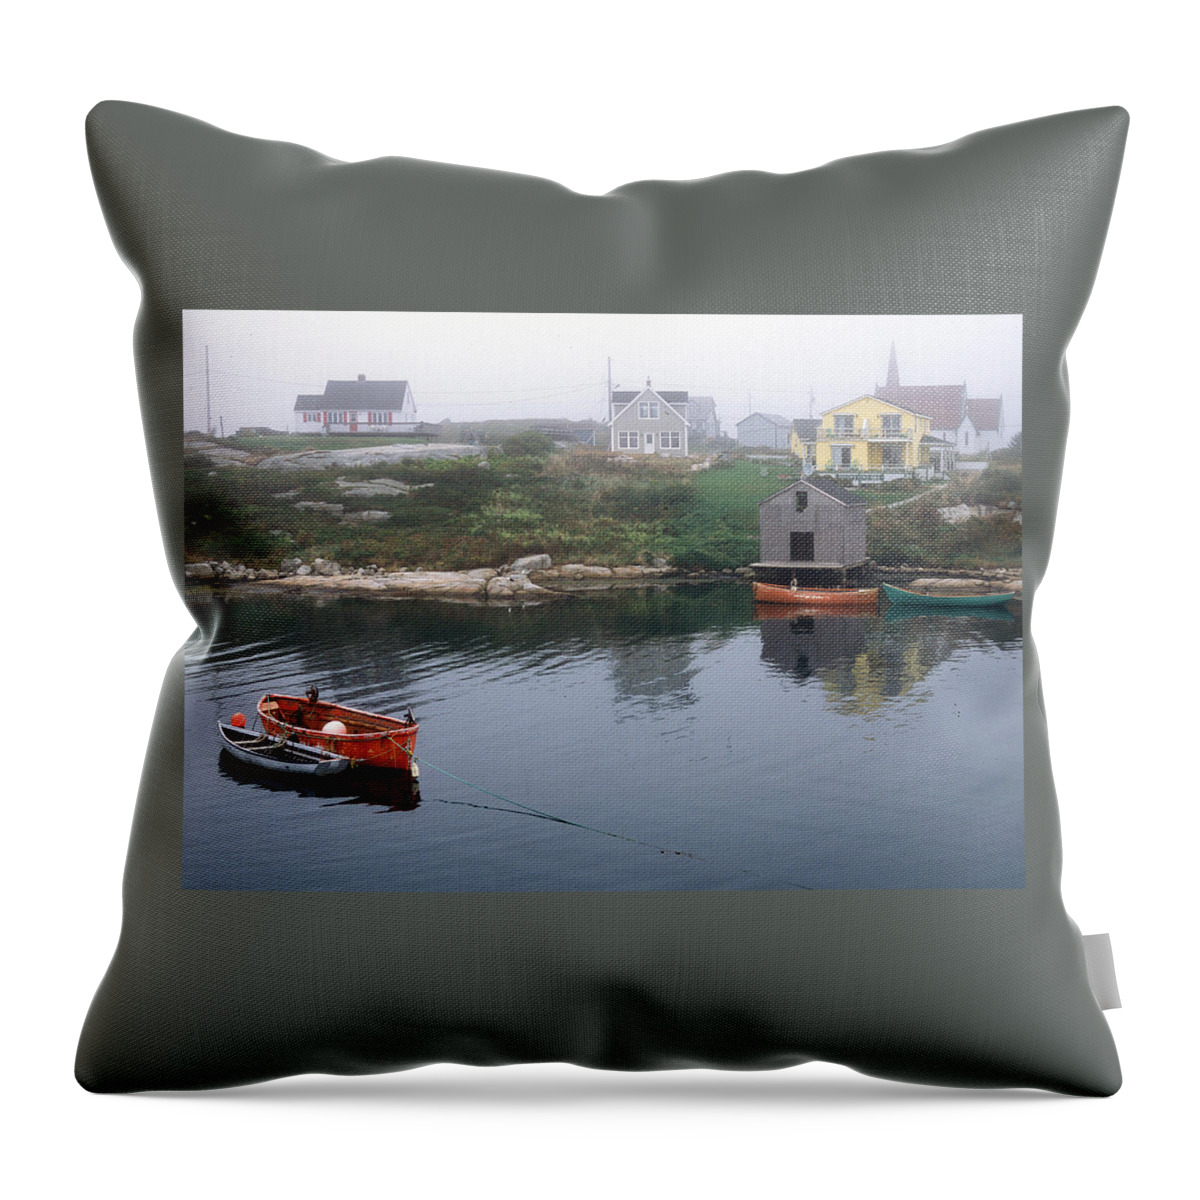 Peggys Cove Throw Pillow featuring the photograph Peggy's Cove M2277 by James C Richardson